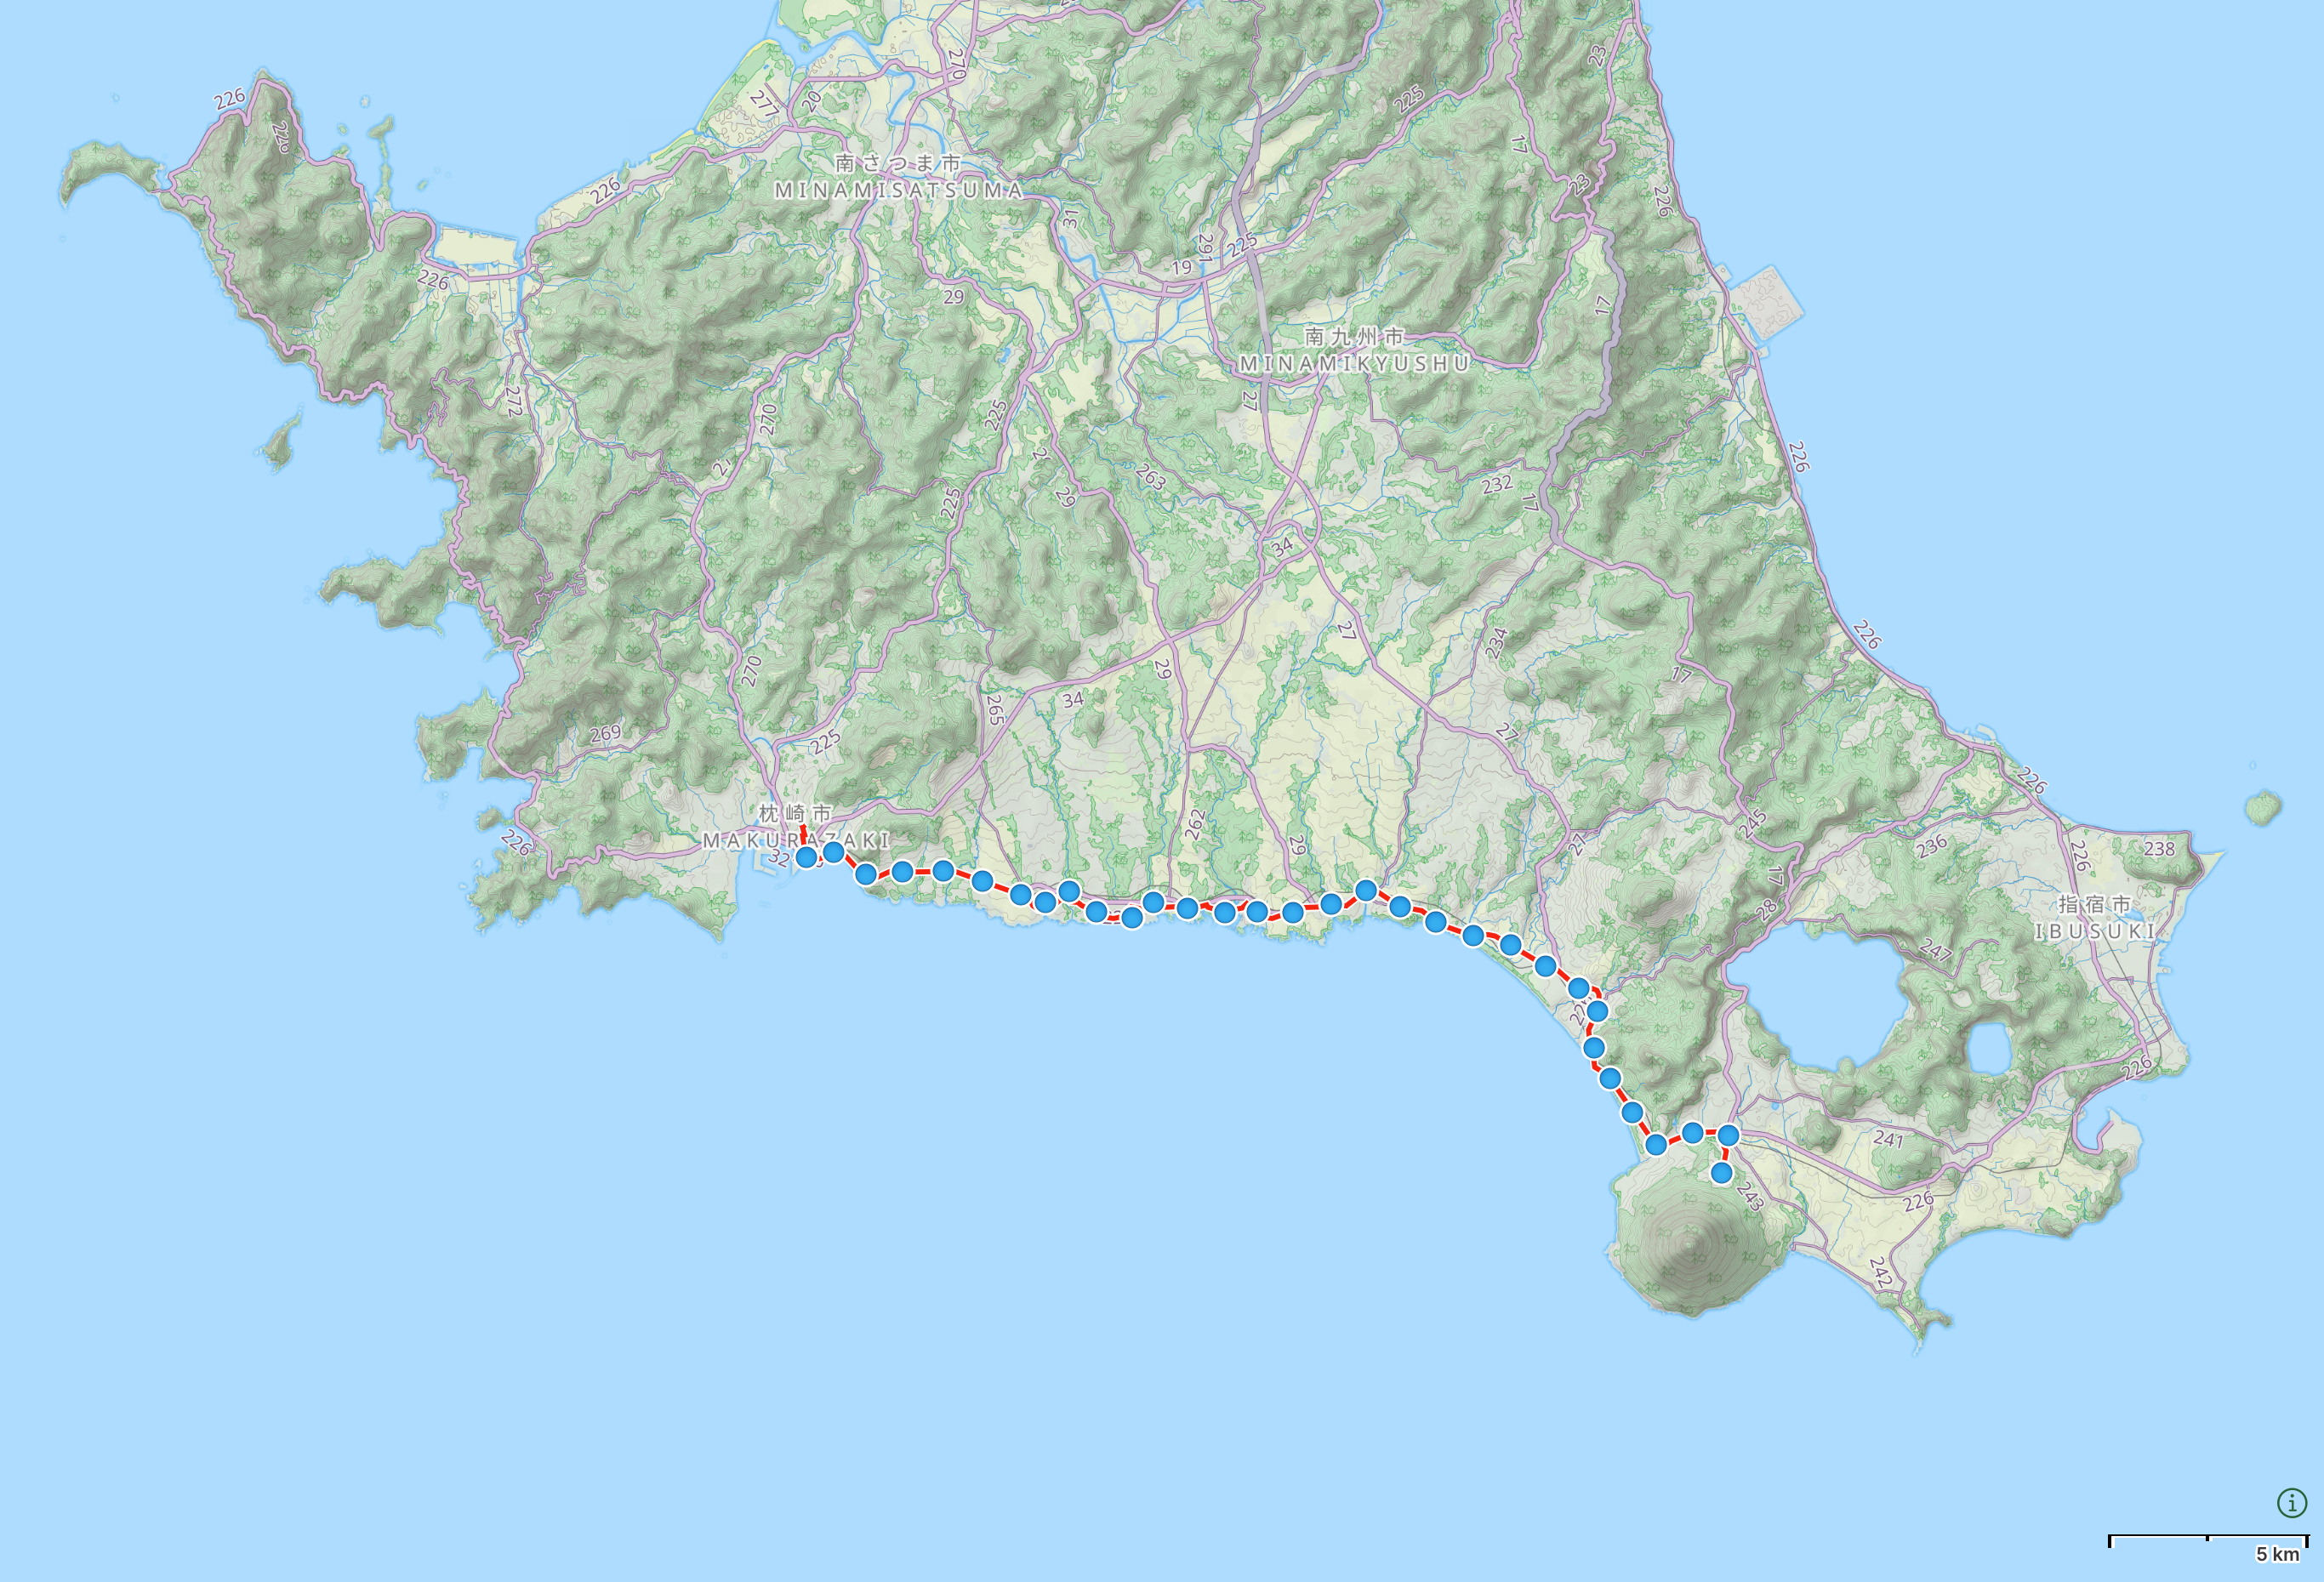 Map of Kagoshima Prefecture with author’s route between Makurazaki and Kaimon highlighted.